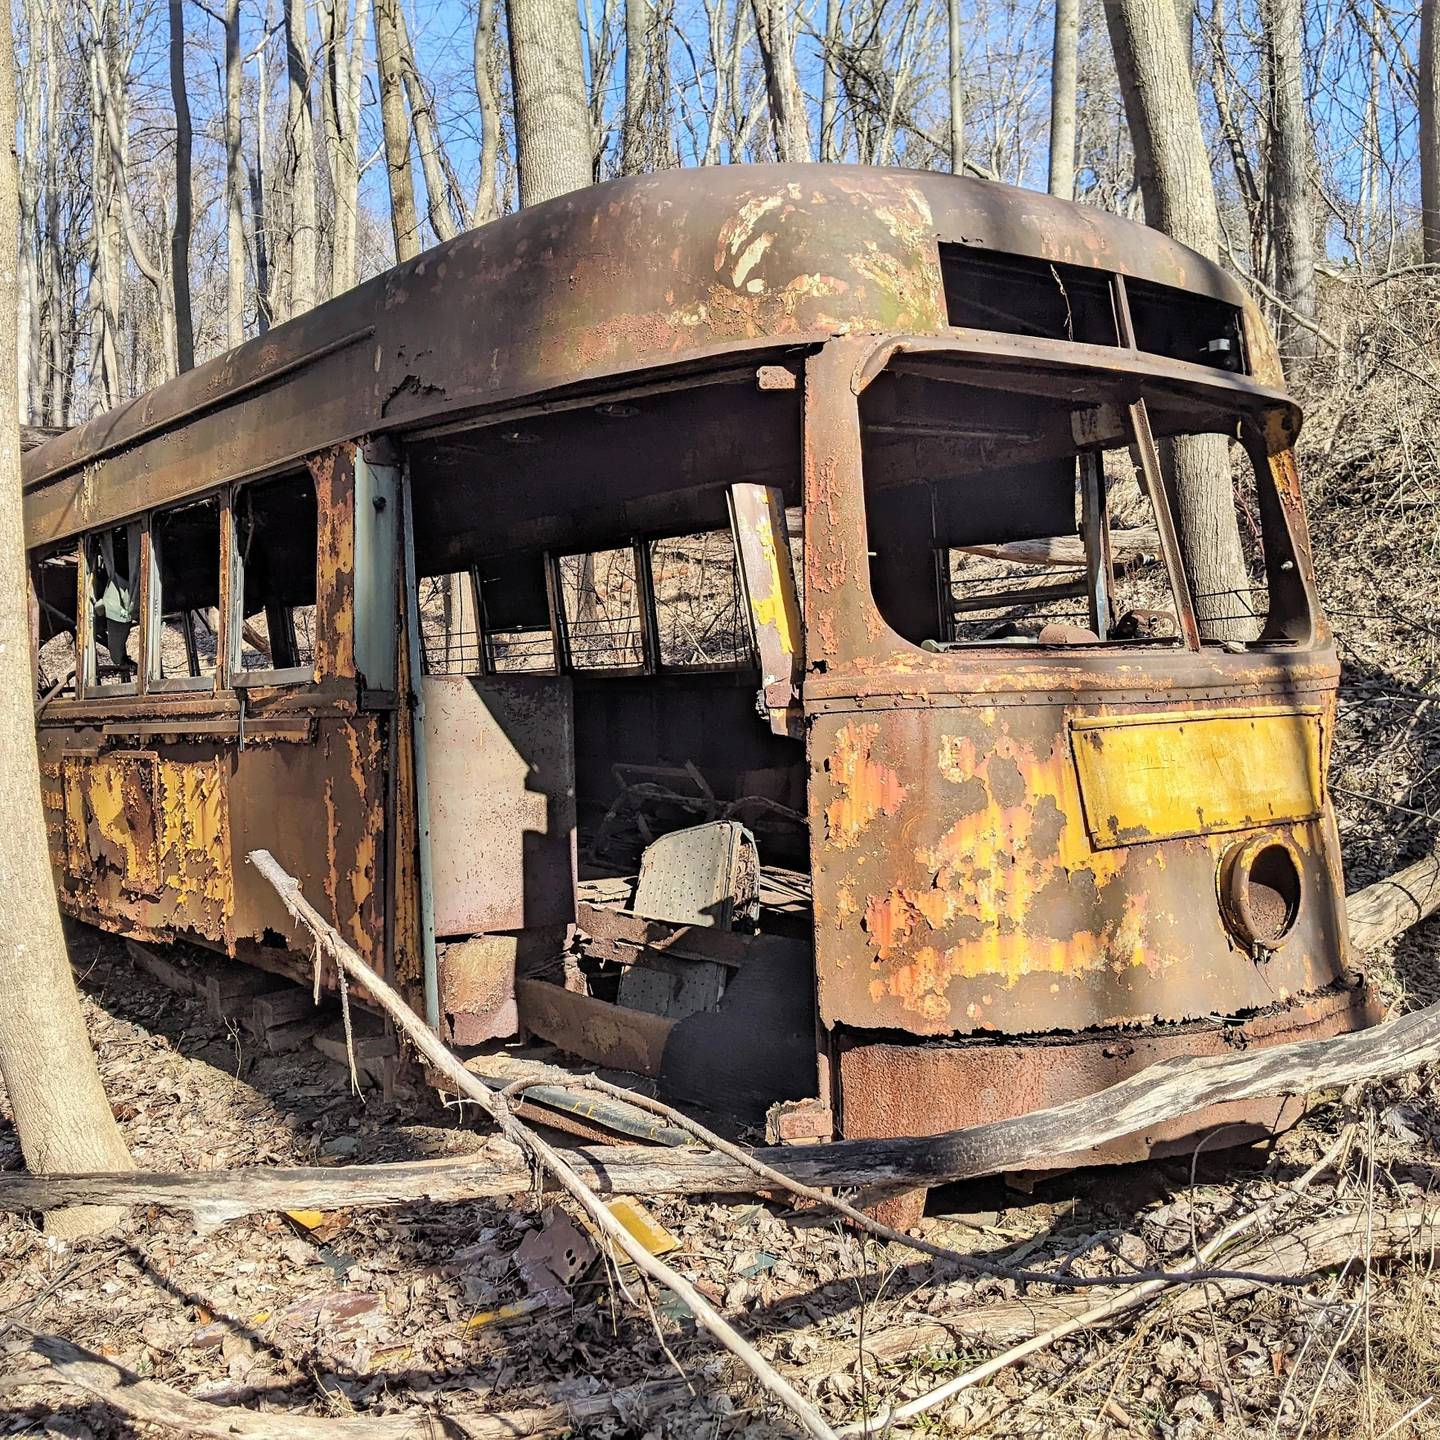 The end of the line for streetcar #7350 is a ditch in a forest in Baltimore County. Why?